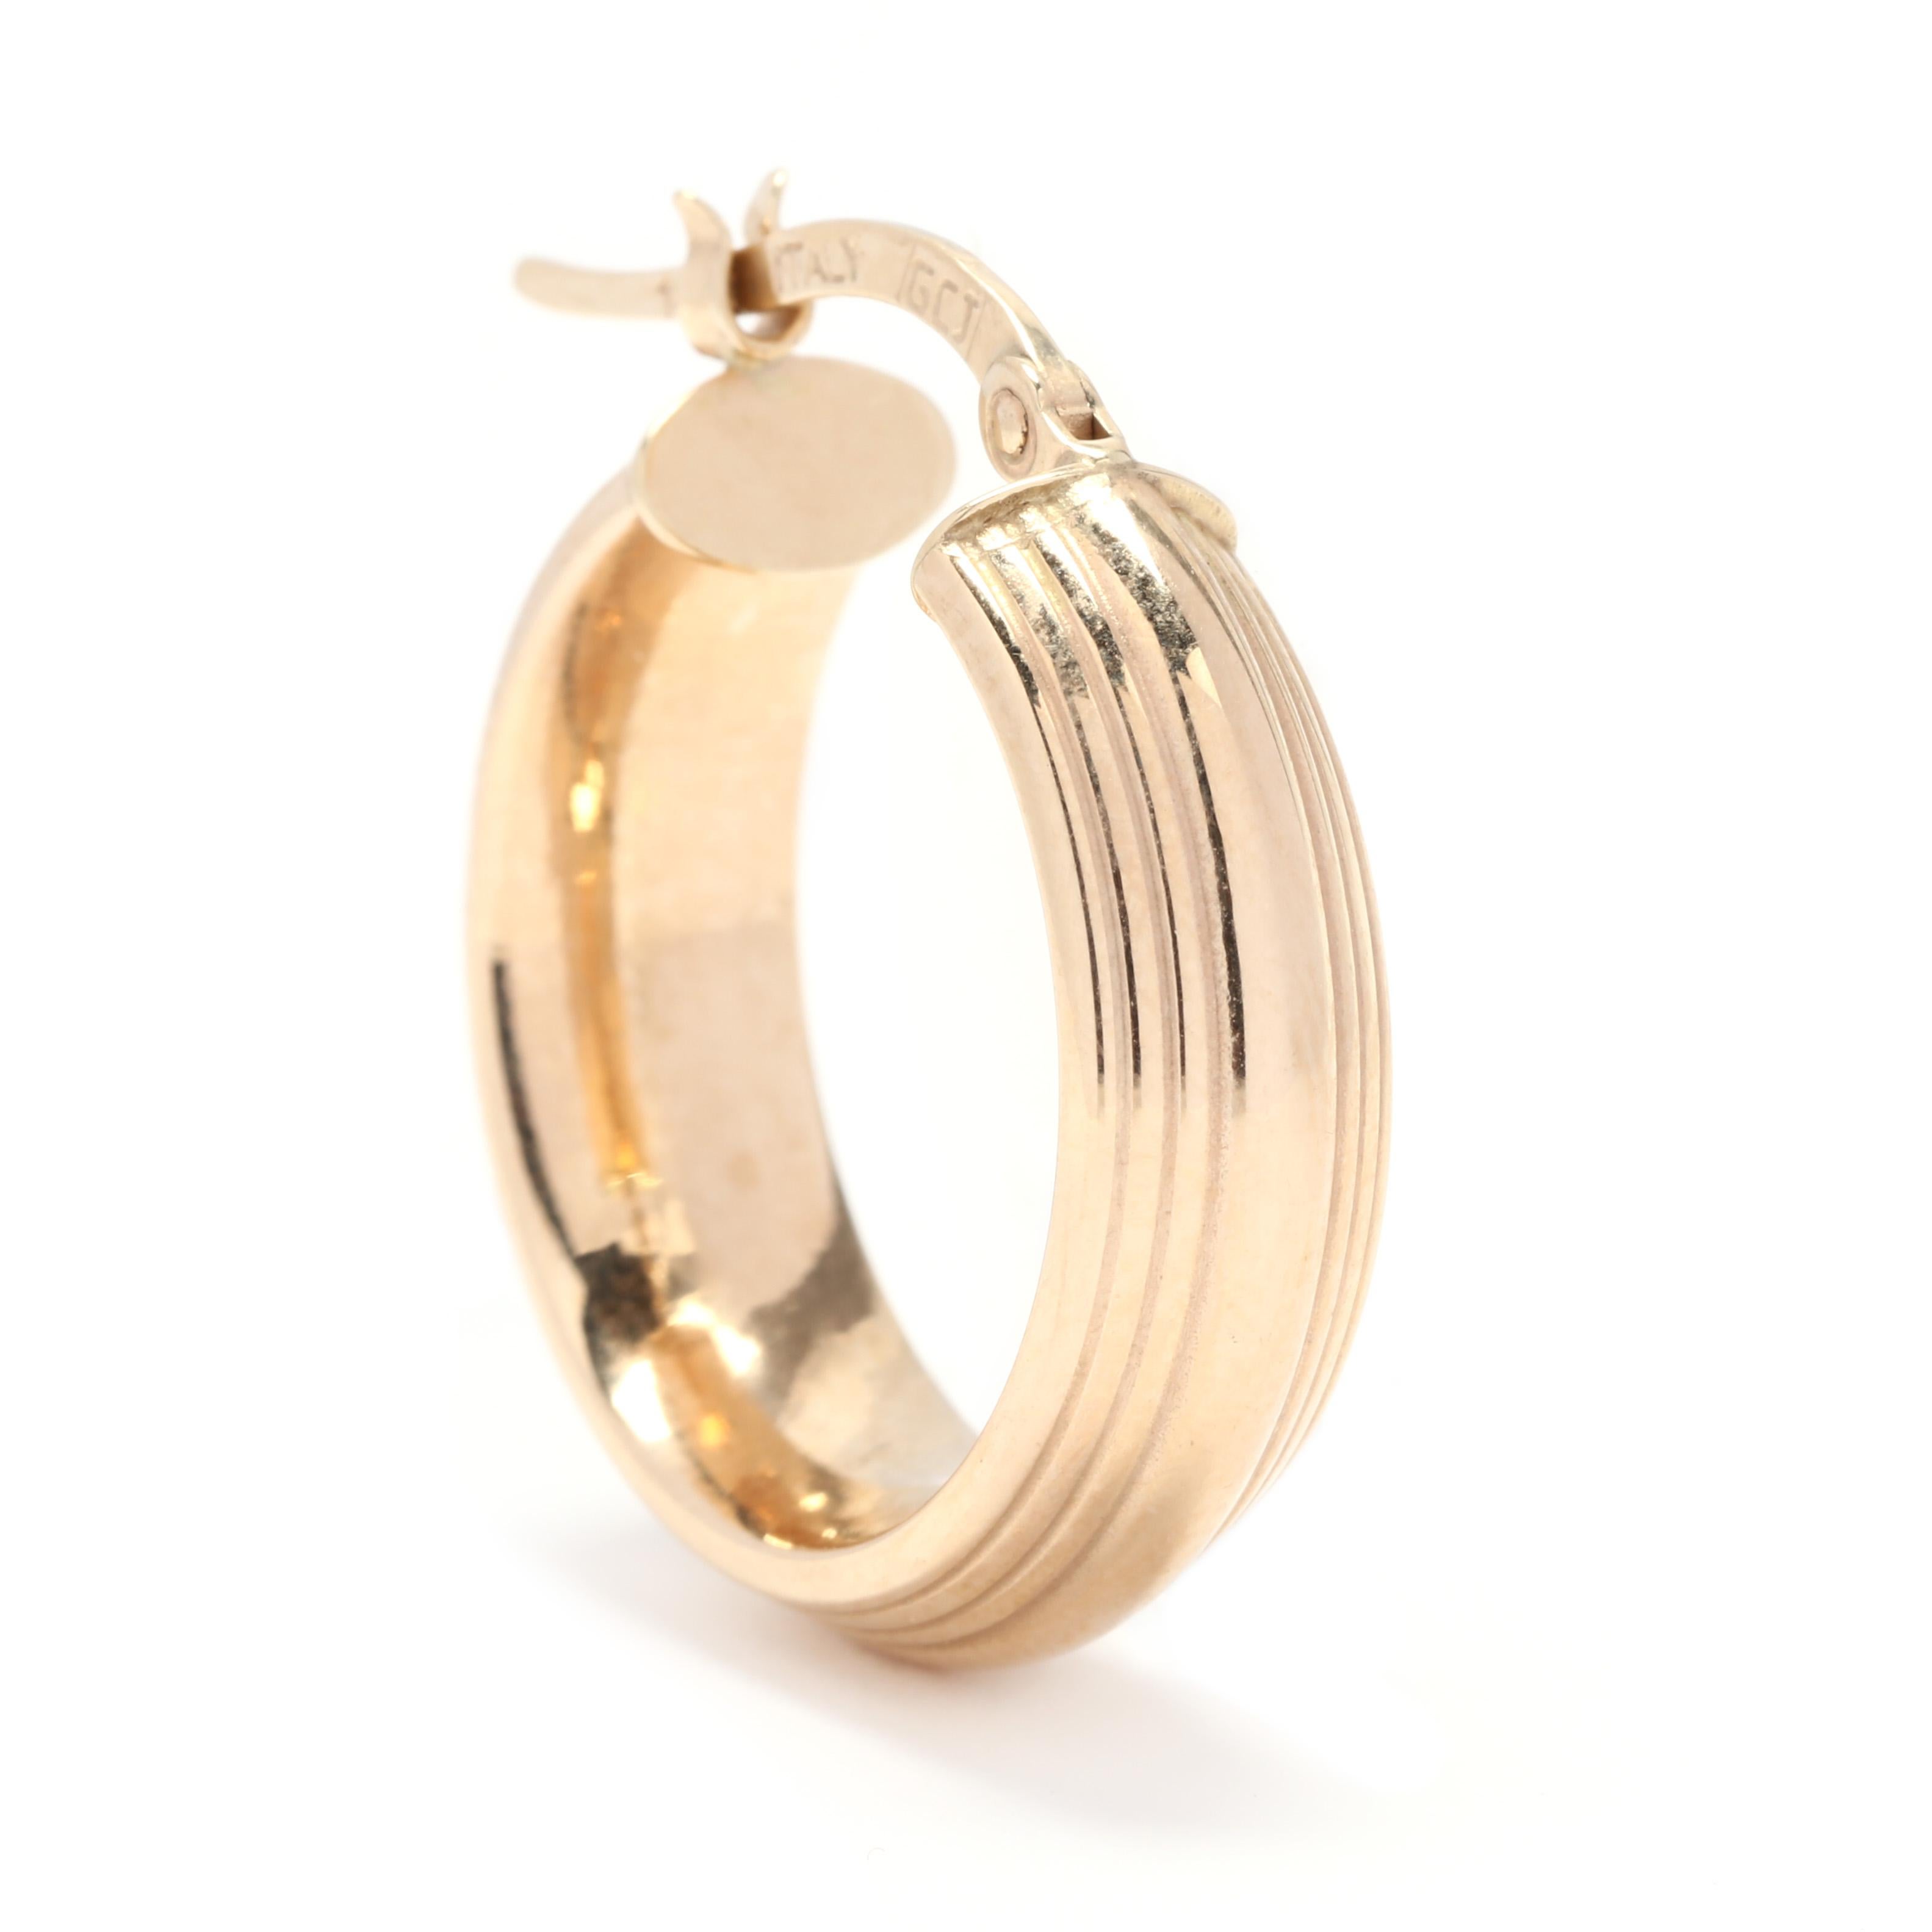 A pair of 14 karat yellow gold ridged knife edge hoop earrings.  These hoops features a knifed edge design with ridged, columned motif and snap closures.

Length: 3/4 in.

Width: 6 mm

1.7 dwts.

A Couple Of Things to Note:
* This is a vintage item